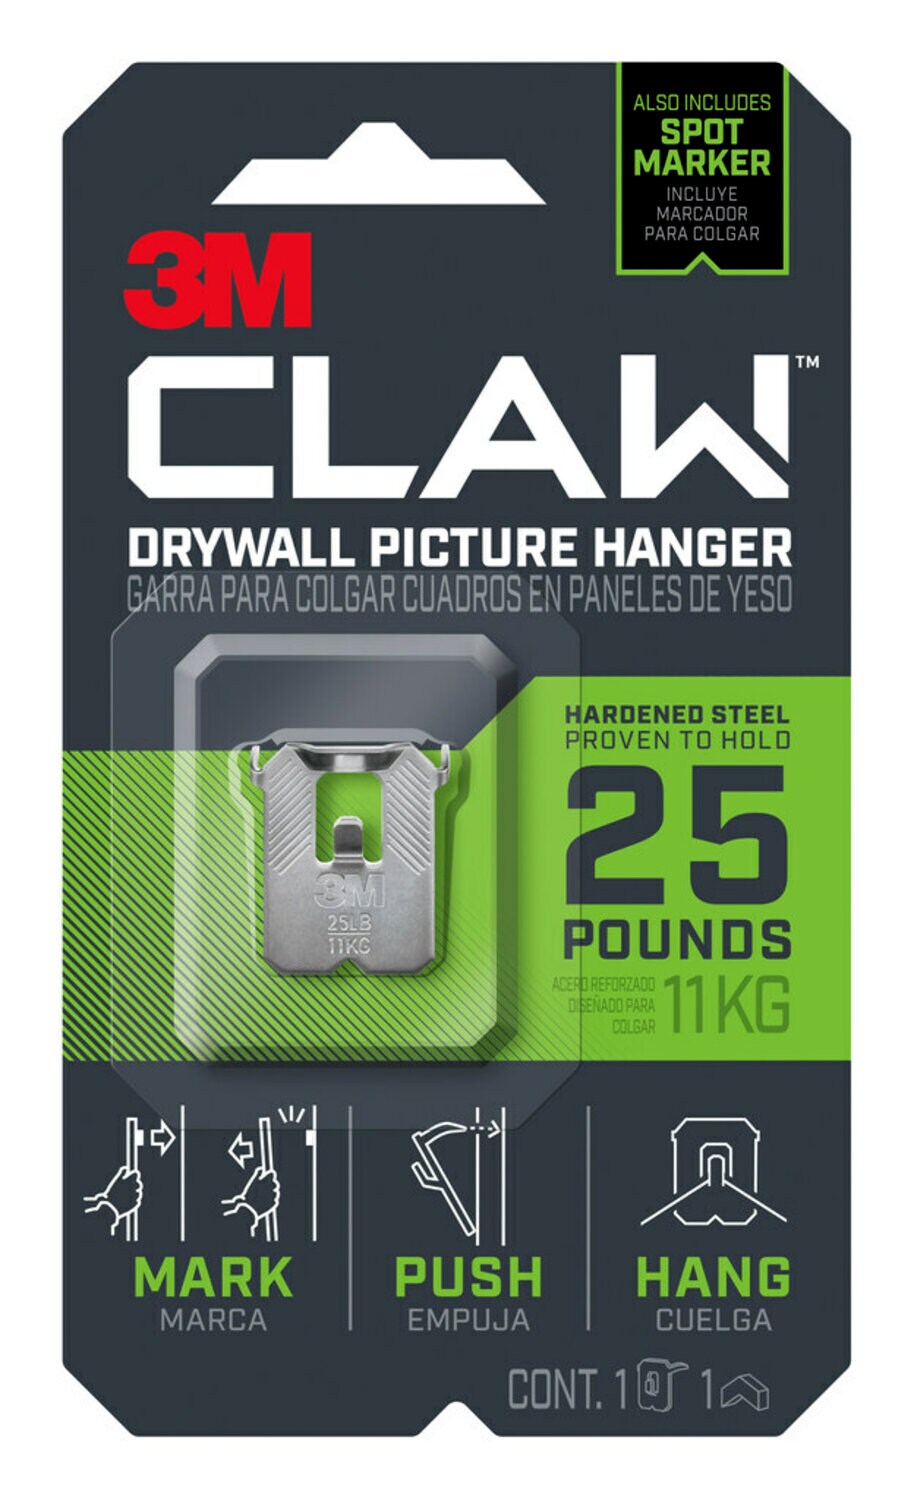 7100227269 - 3M CLAW Drywall Picture Hanger 25 lb with Temporary Spot Marker 3PH25M-1EF, 1 hanger, 1 marker